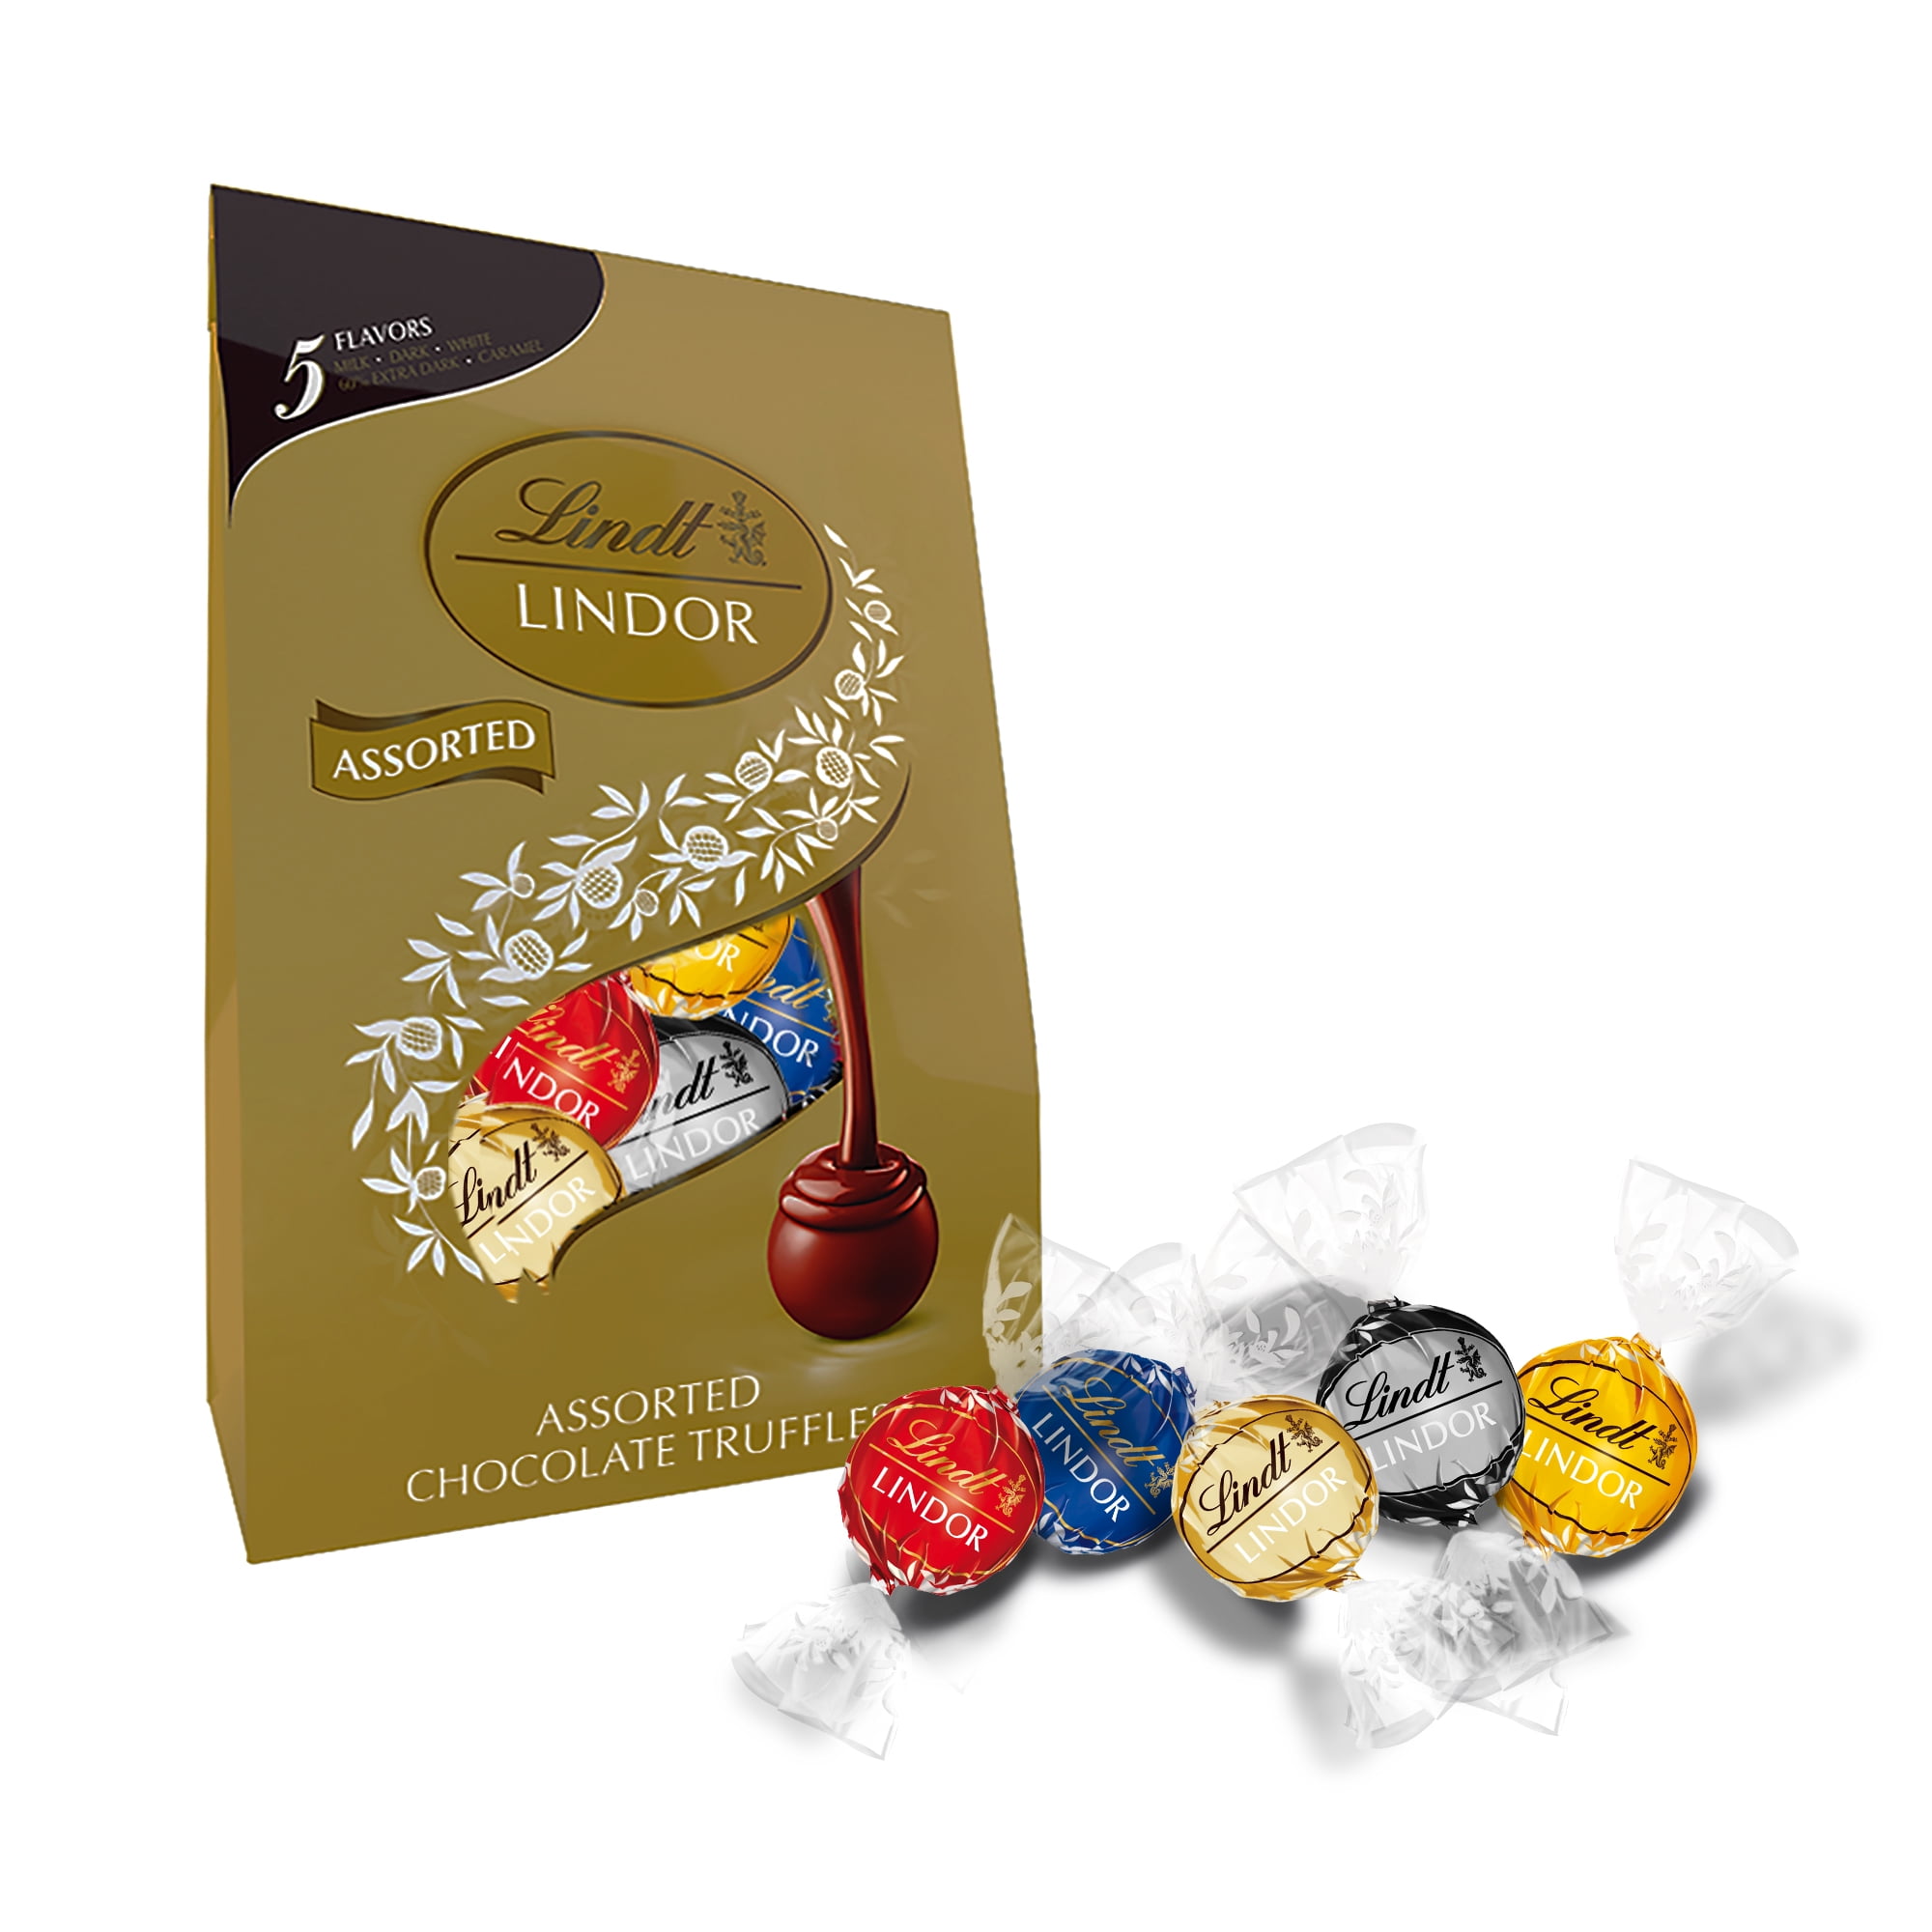 Lindt LINDOR Assorted Chocolate Candy Truffles, Chocolate with Smooth,  Melting Truffle Center, Easter Basket Stuffers, 15.2 oz. Bag